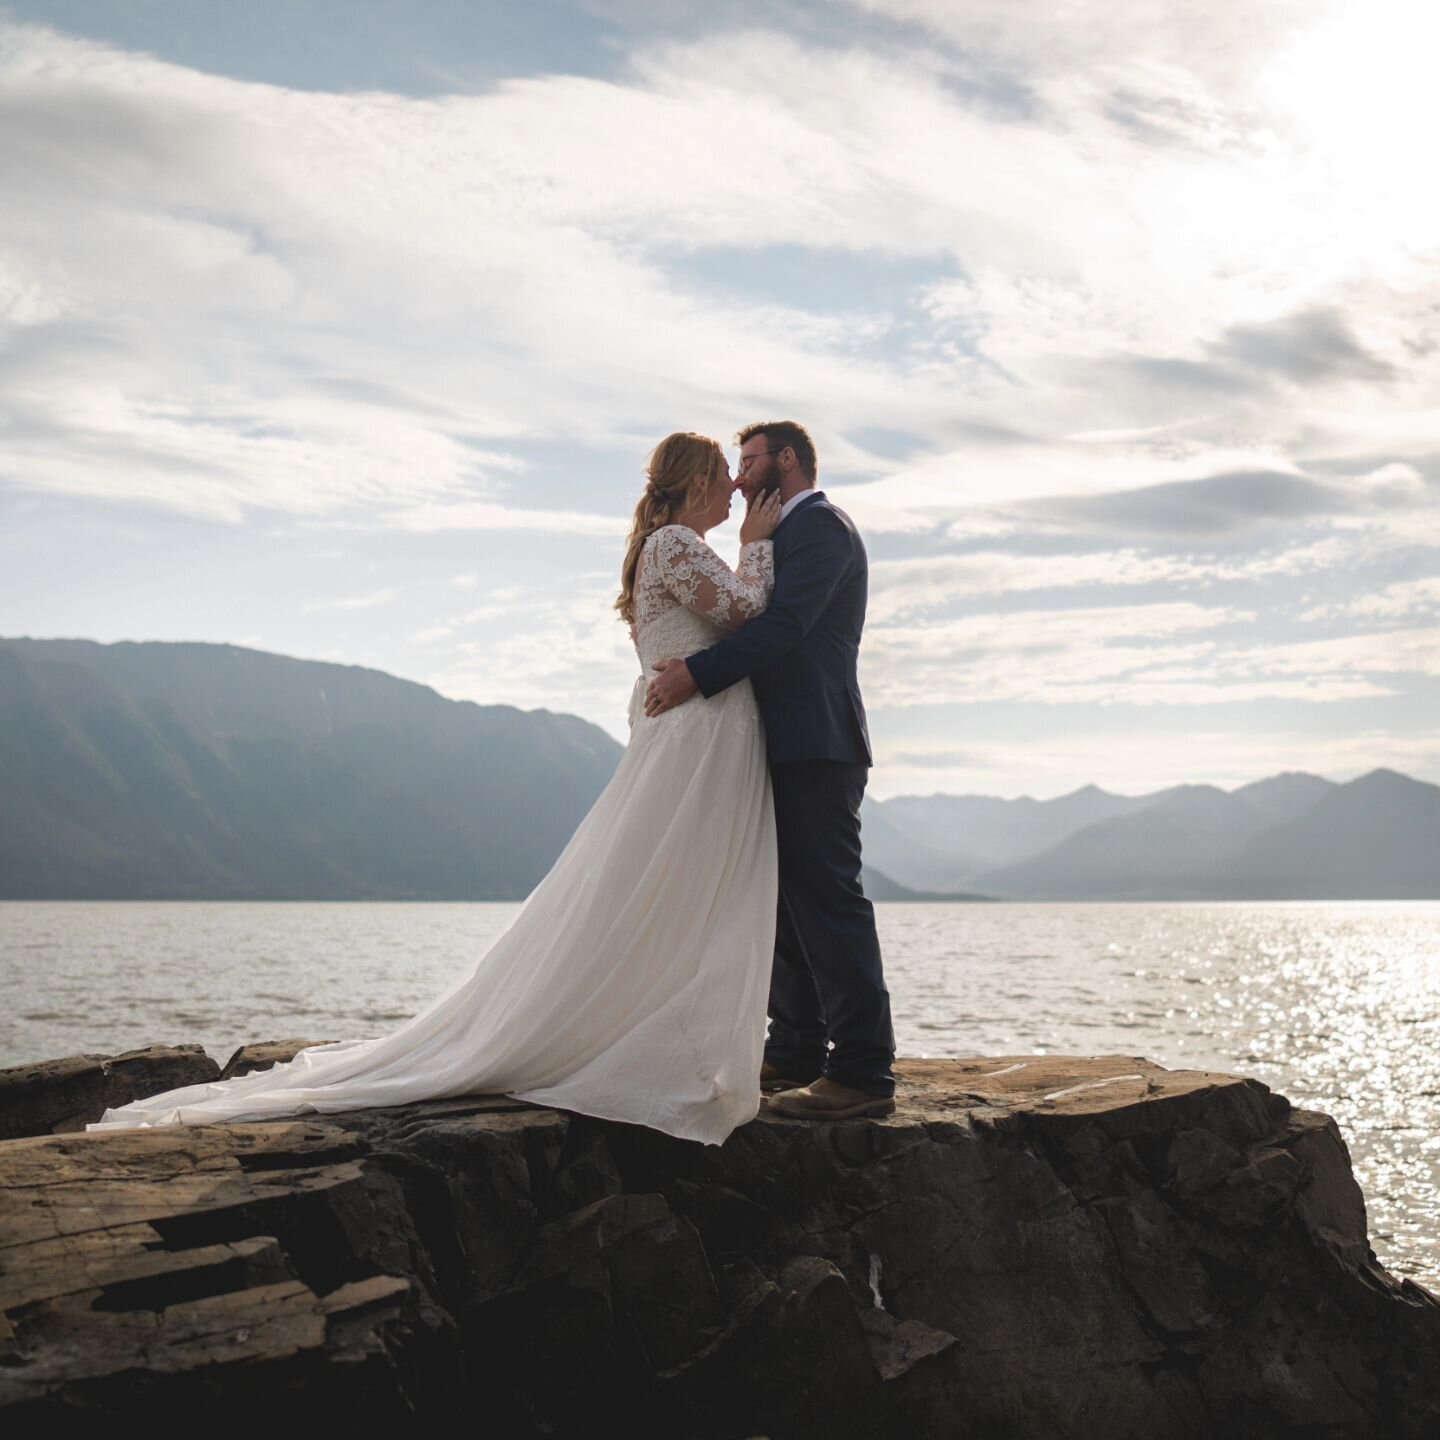 Thinking back to that one time these two eloped along a bay in Alaska